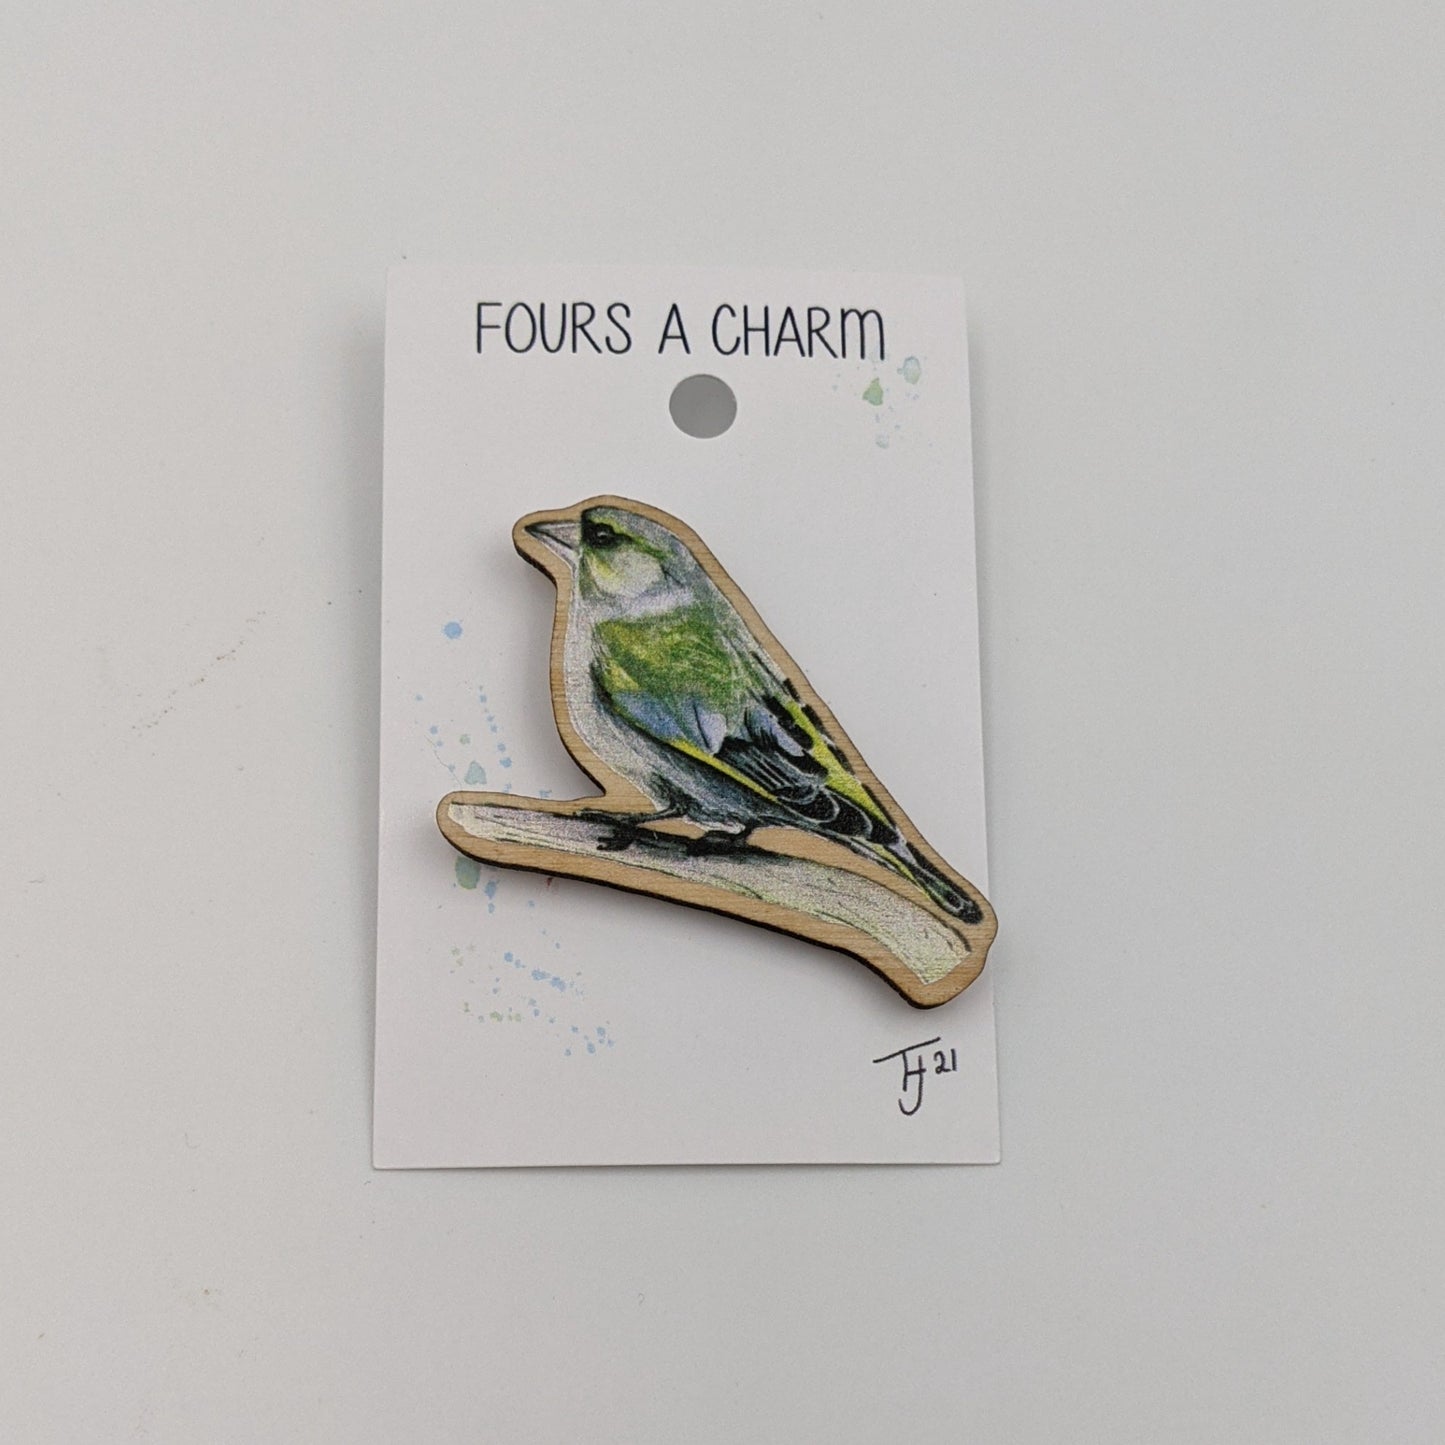 "Fours a Charm" Greenfinch Wooden Fridge Magnet